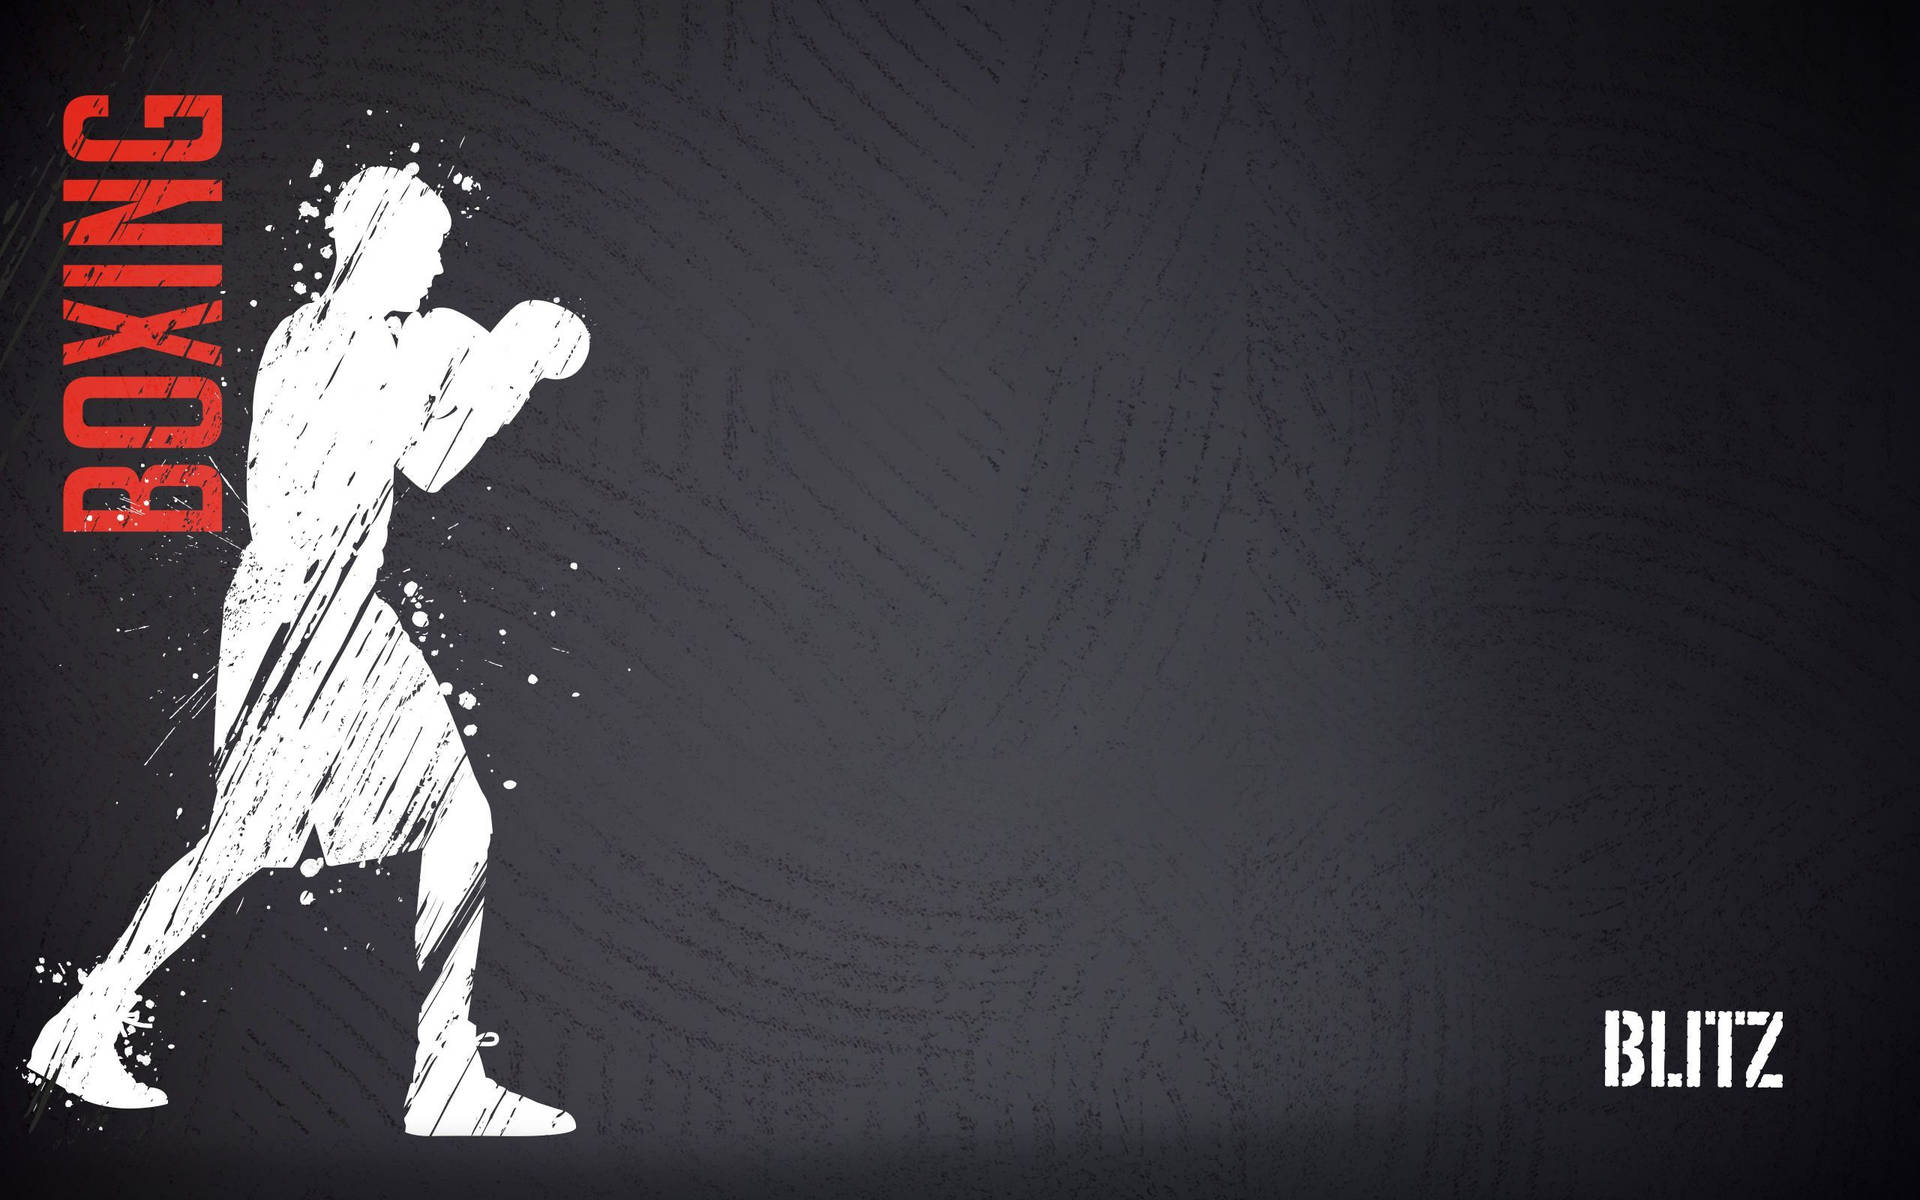 Boxing Graphic Sketch Wallpaper